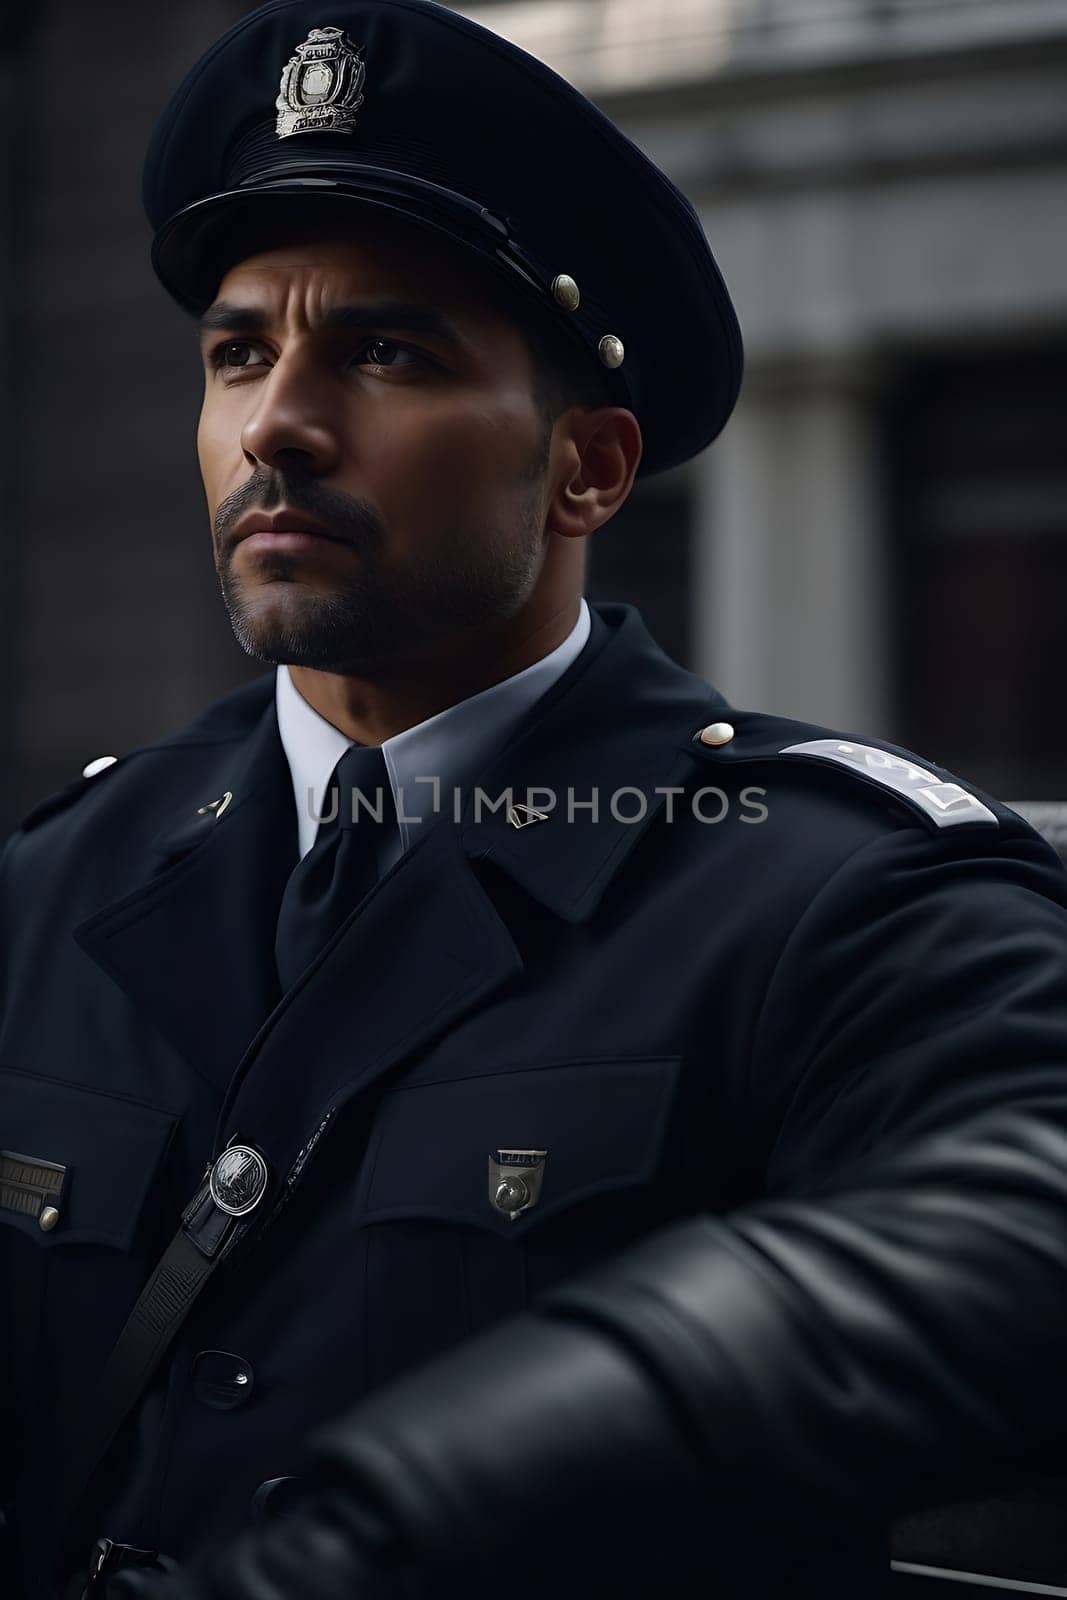 A police officer in uniform stands in front of a building, dutifully protecting and ensuring safety.